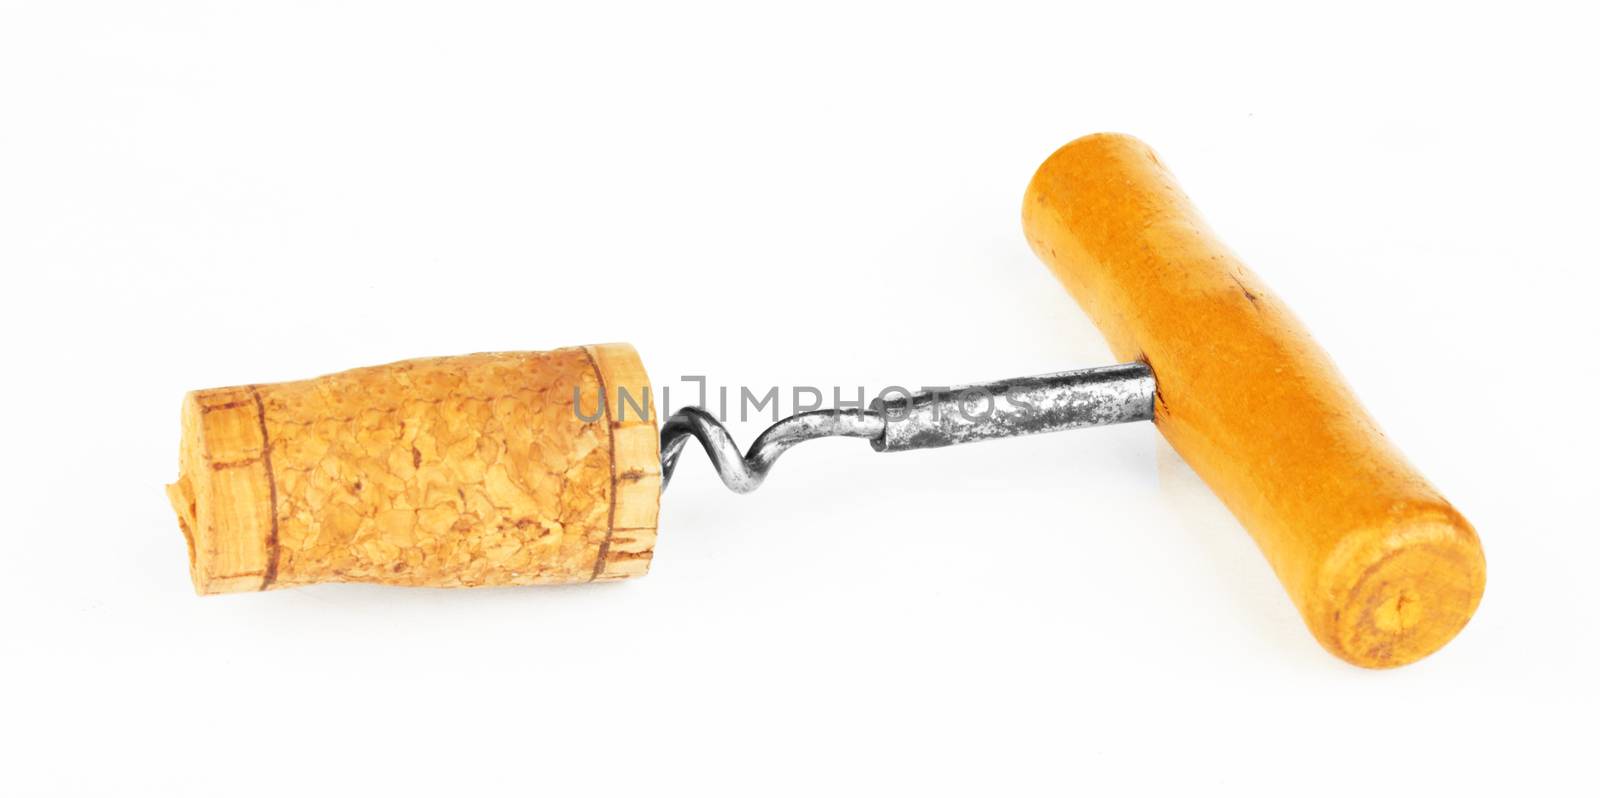 close up of bottle opener and cork of wine bottle on white background with clipping path 